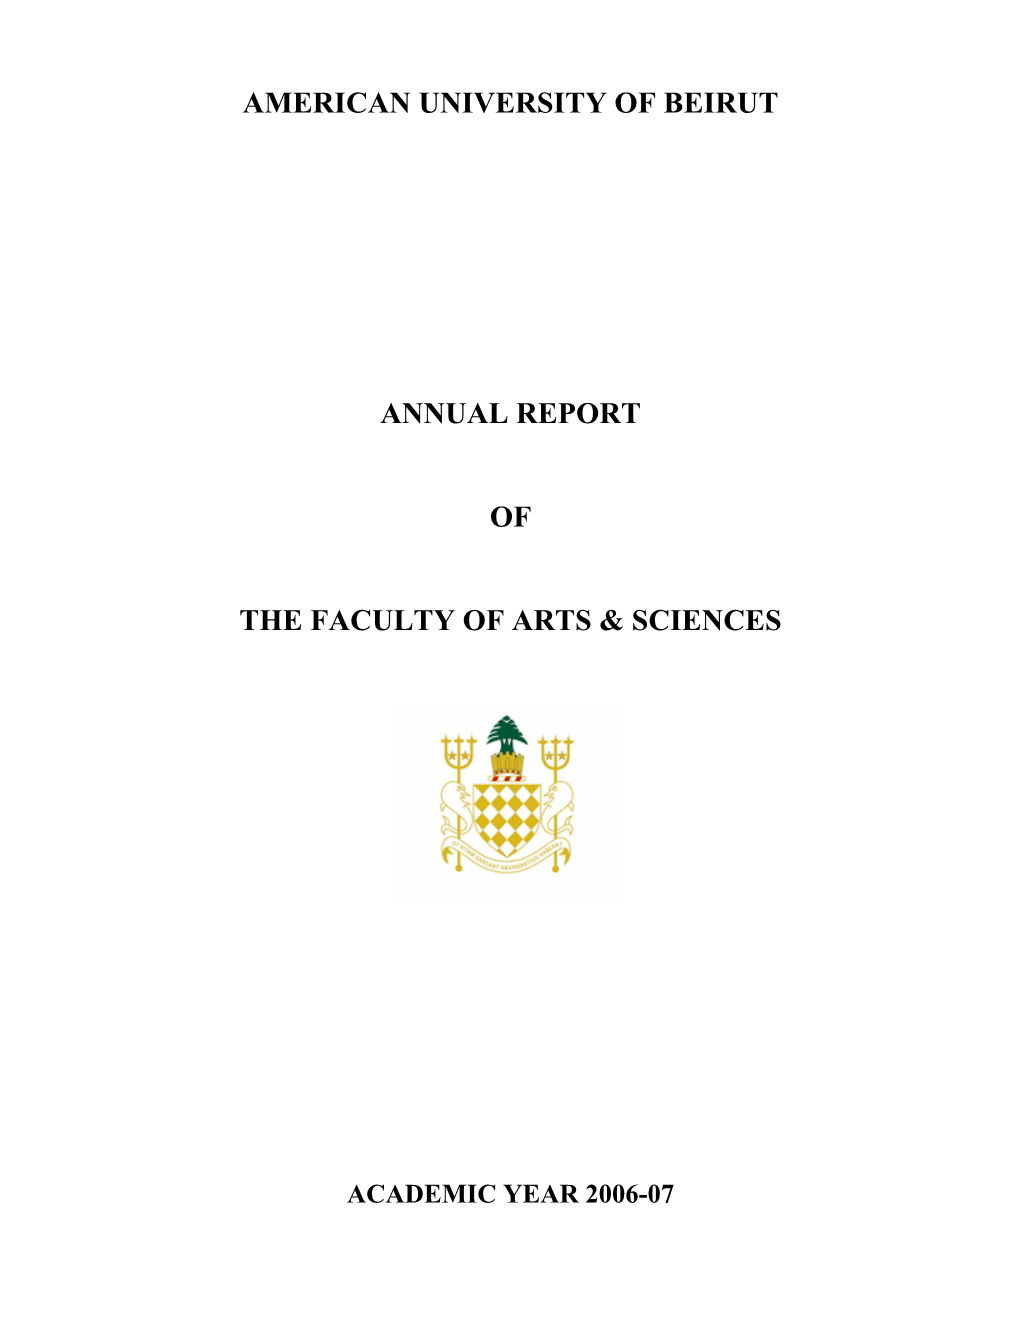 American University of Beirut Annual Report of the Faculty of Arts & Sciences